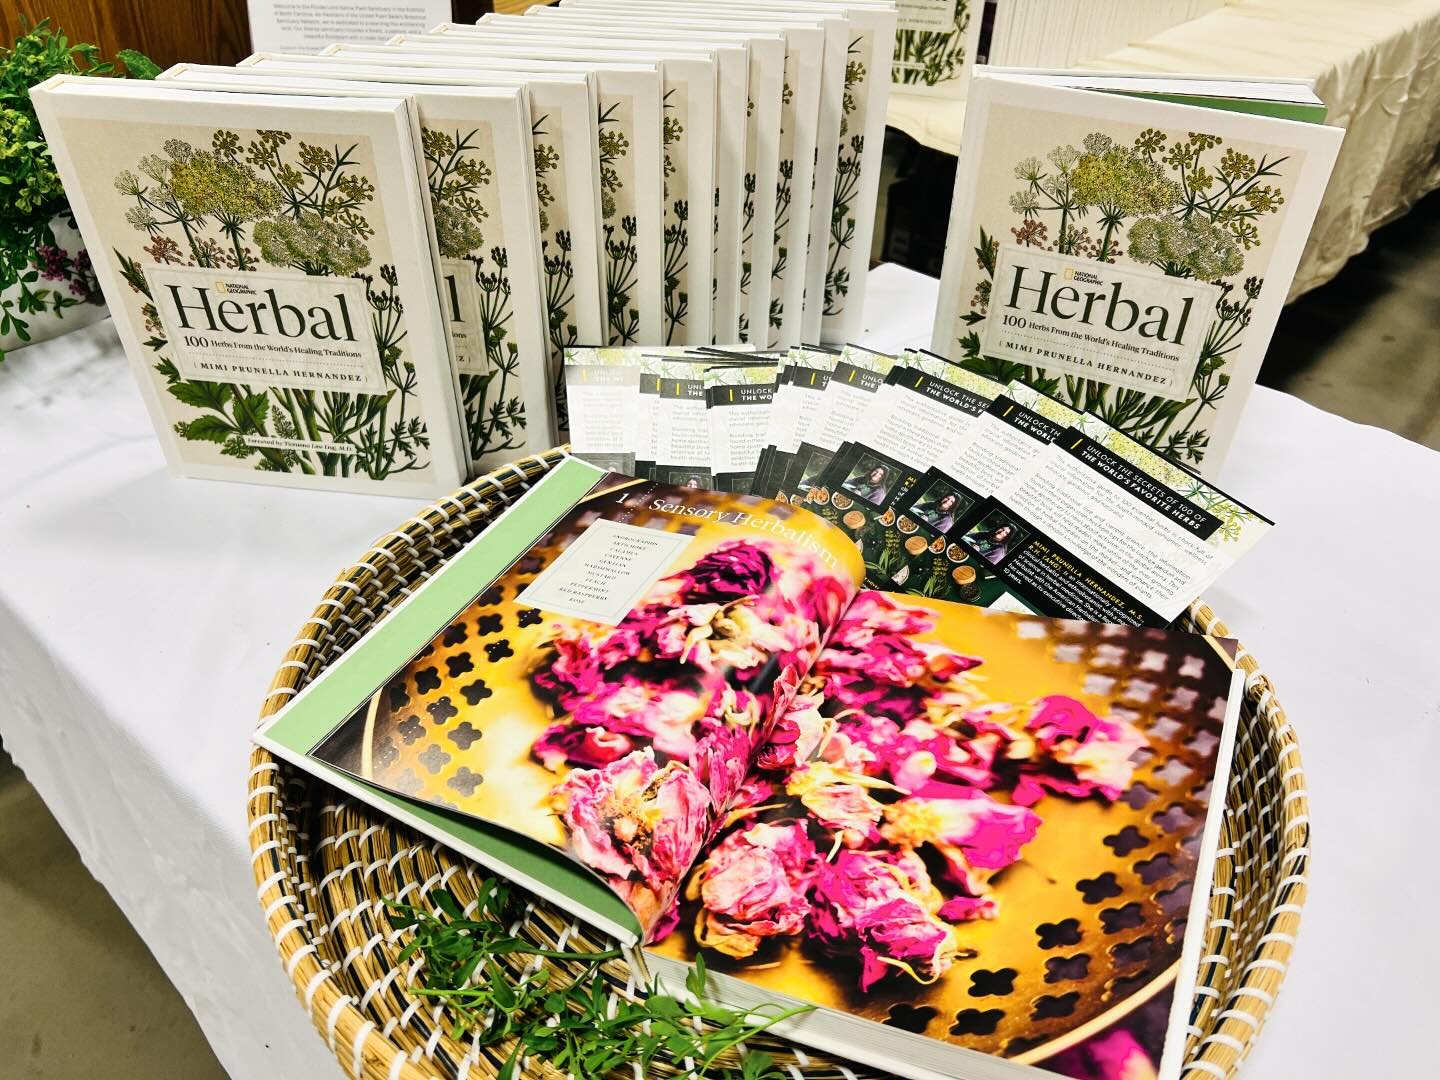 Signing National Geographic Herbal books all weekend at the @ashevilleherbfest 🍃🌺 Come get your copy! @natgeobooks @natgeo #herbbook #herbalist #medicinalherbs #nationalgeographicherbal #100herbs #festival #herbfestival